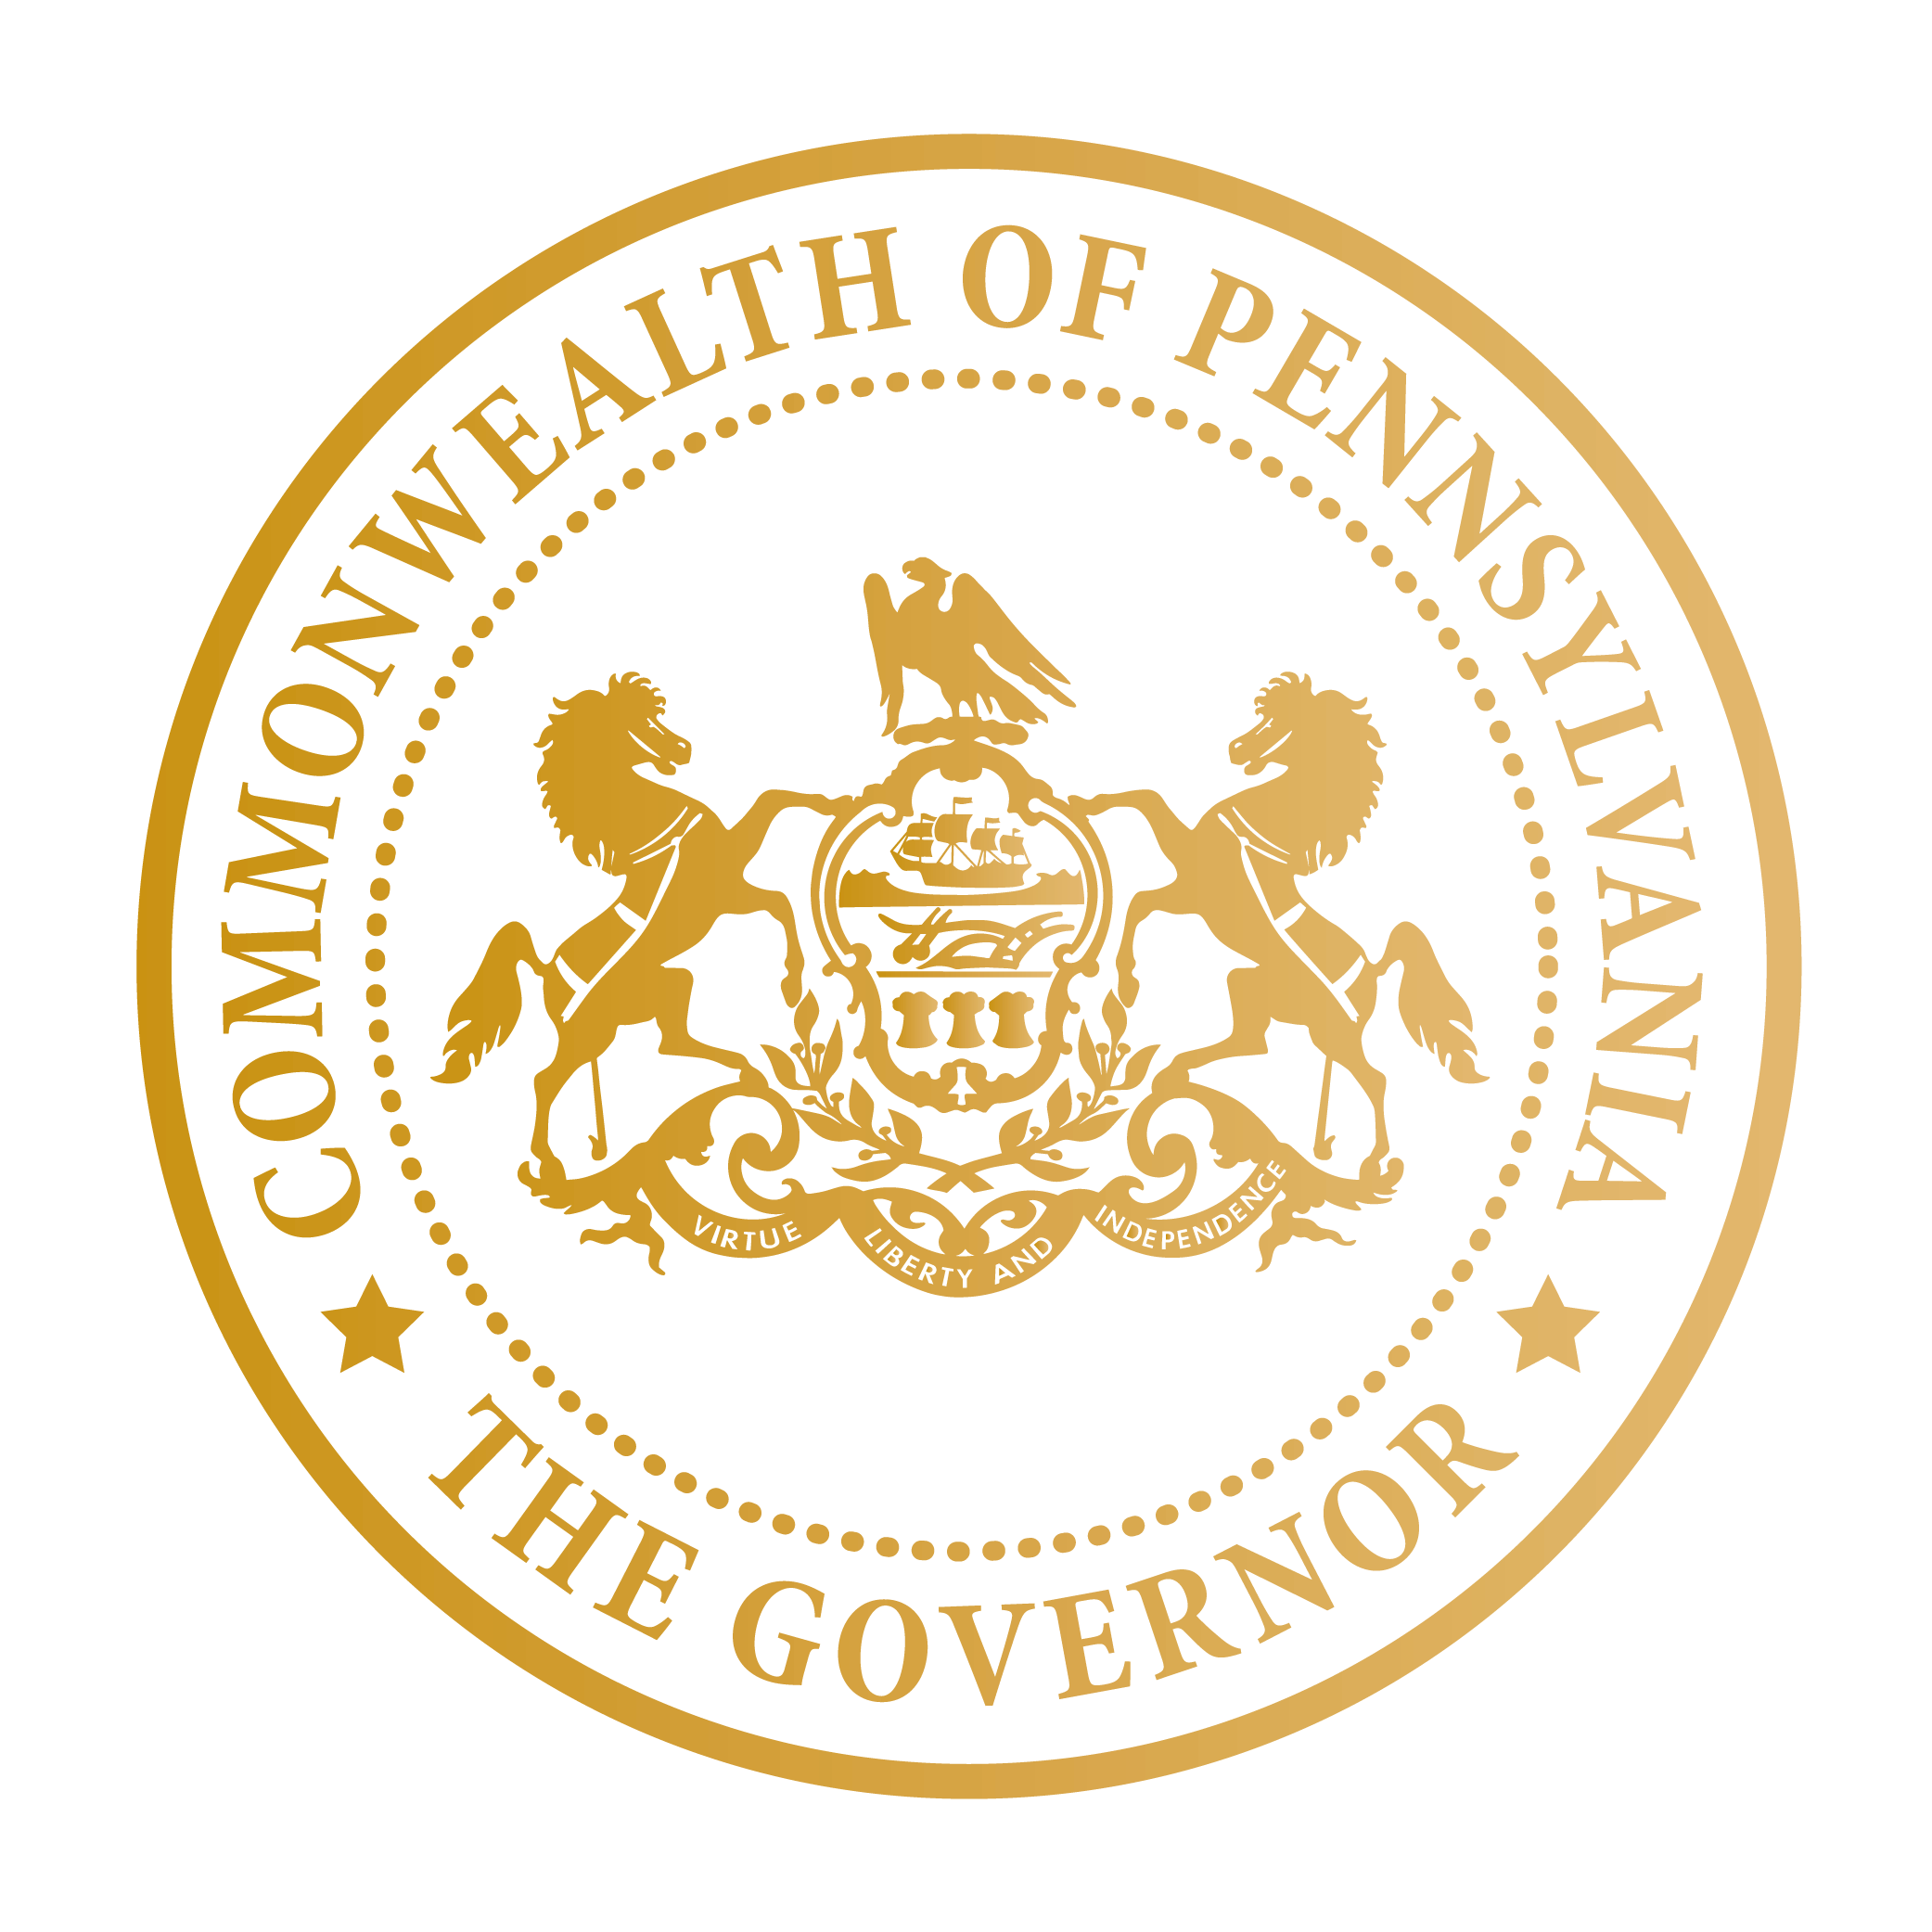 Governor's office seal